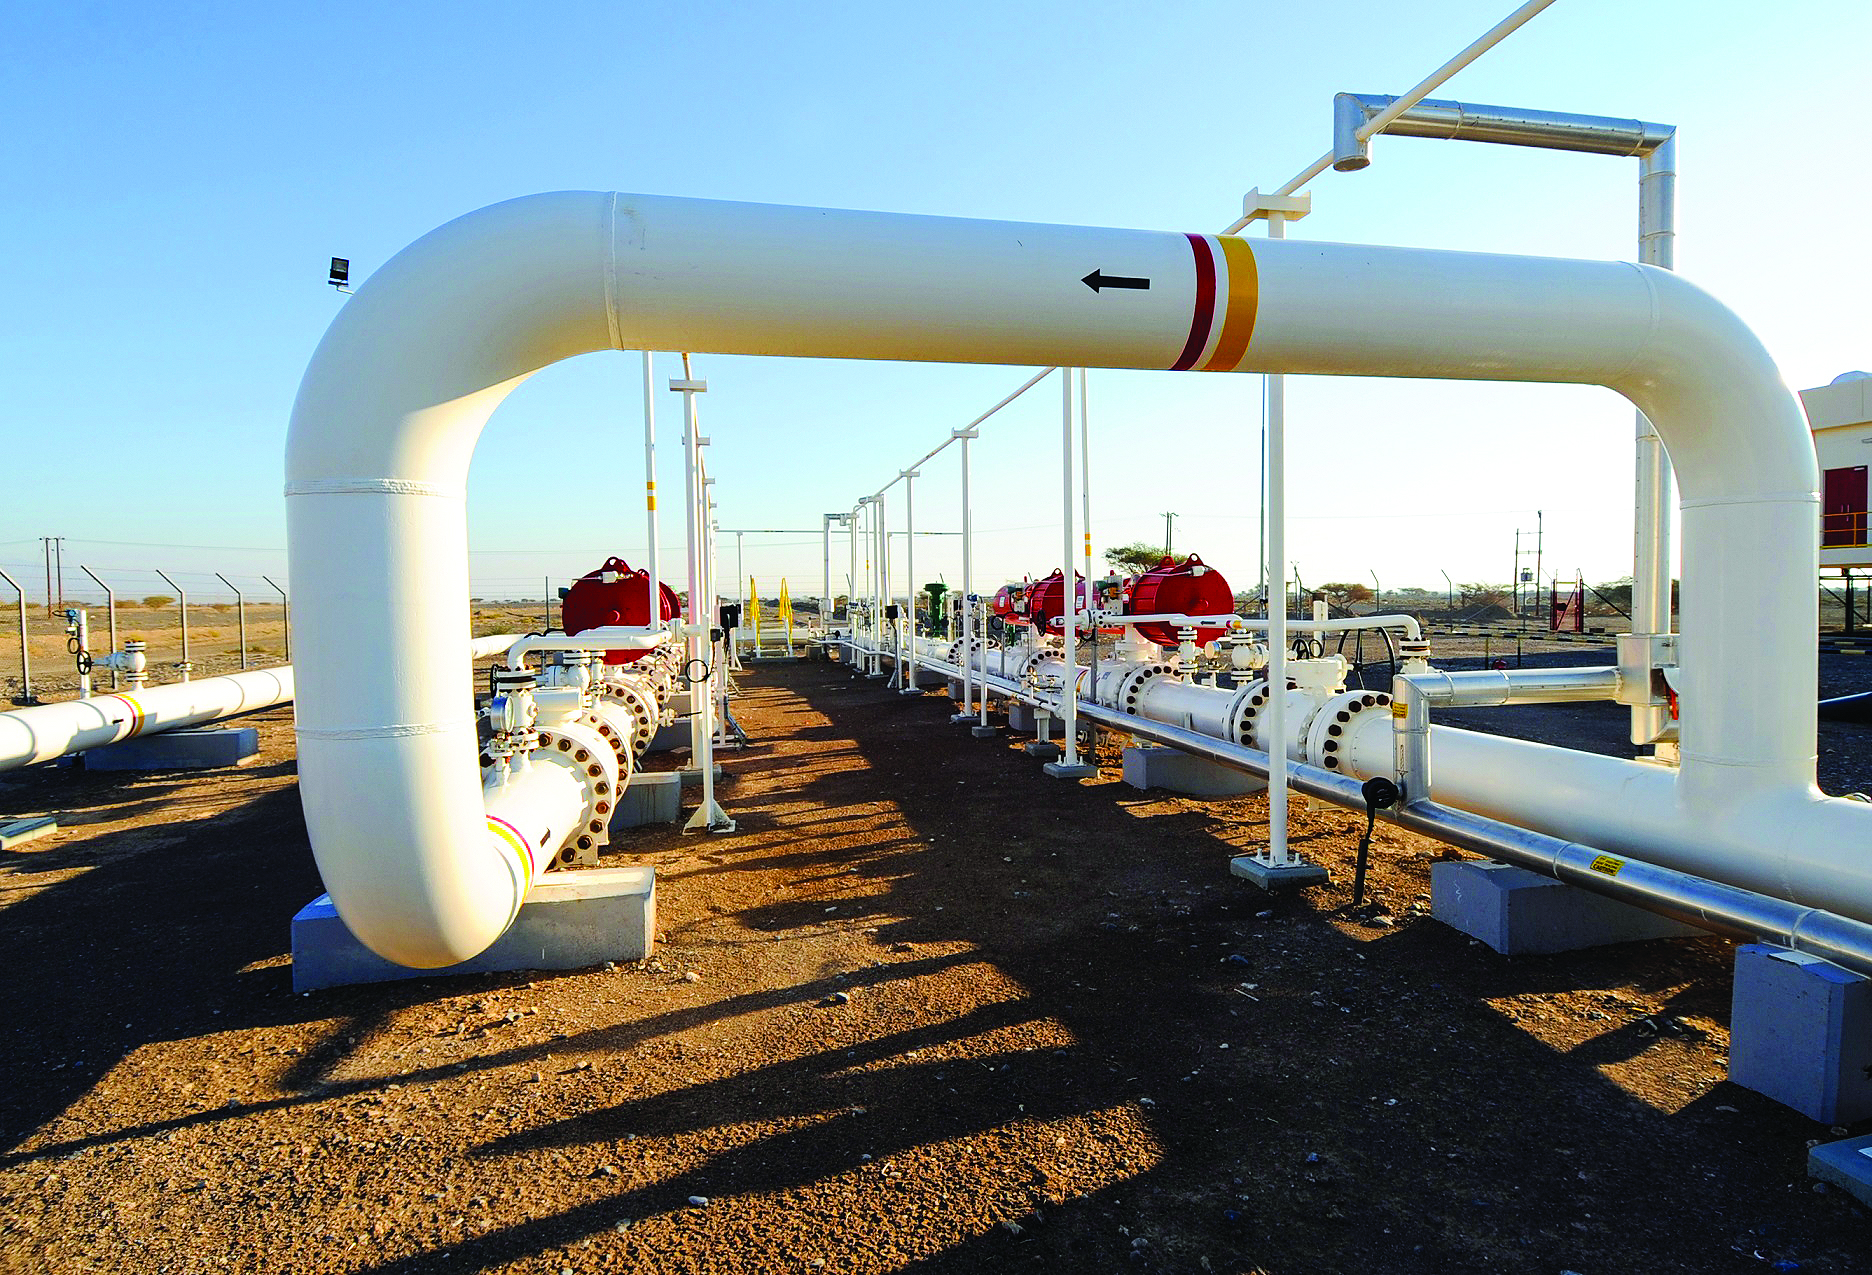 Duqm to receive natural gas supply by 2019